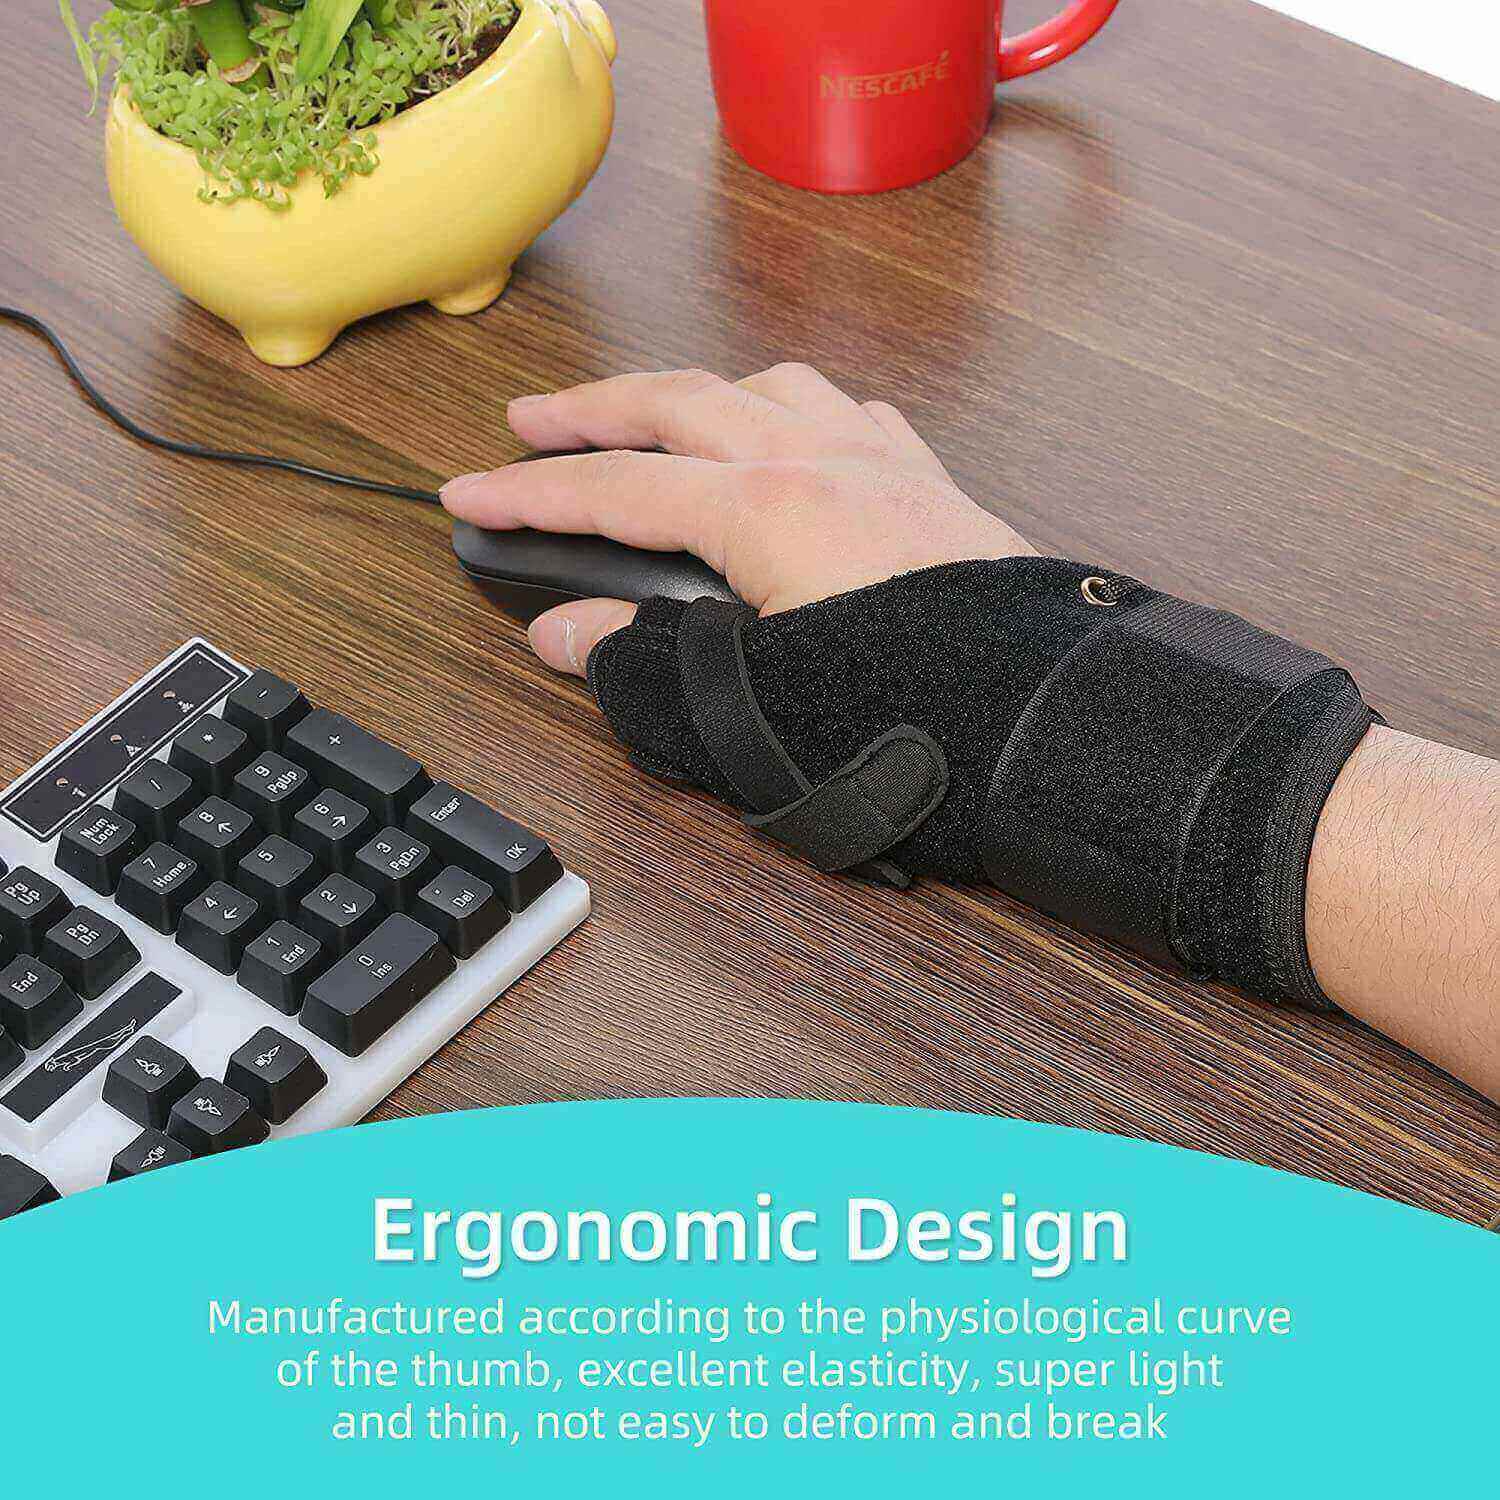 wrist thumb spica splint, hand brace for de Quervain's tenosynovitis, one hand gripping mouse